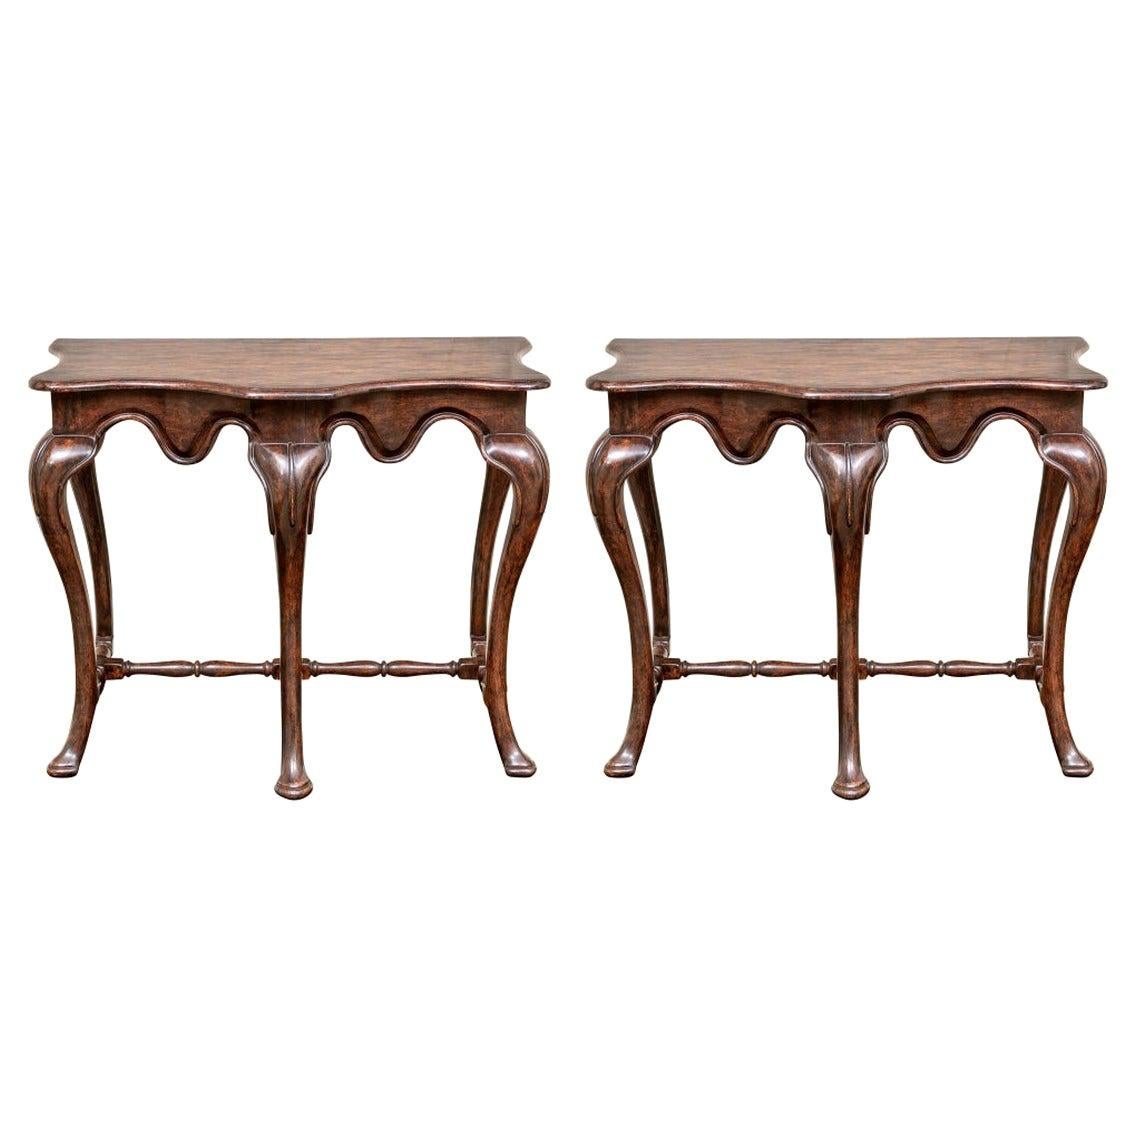 Pair of Carved Consoles by David Iatesta for John Rosselli